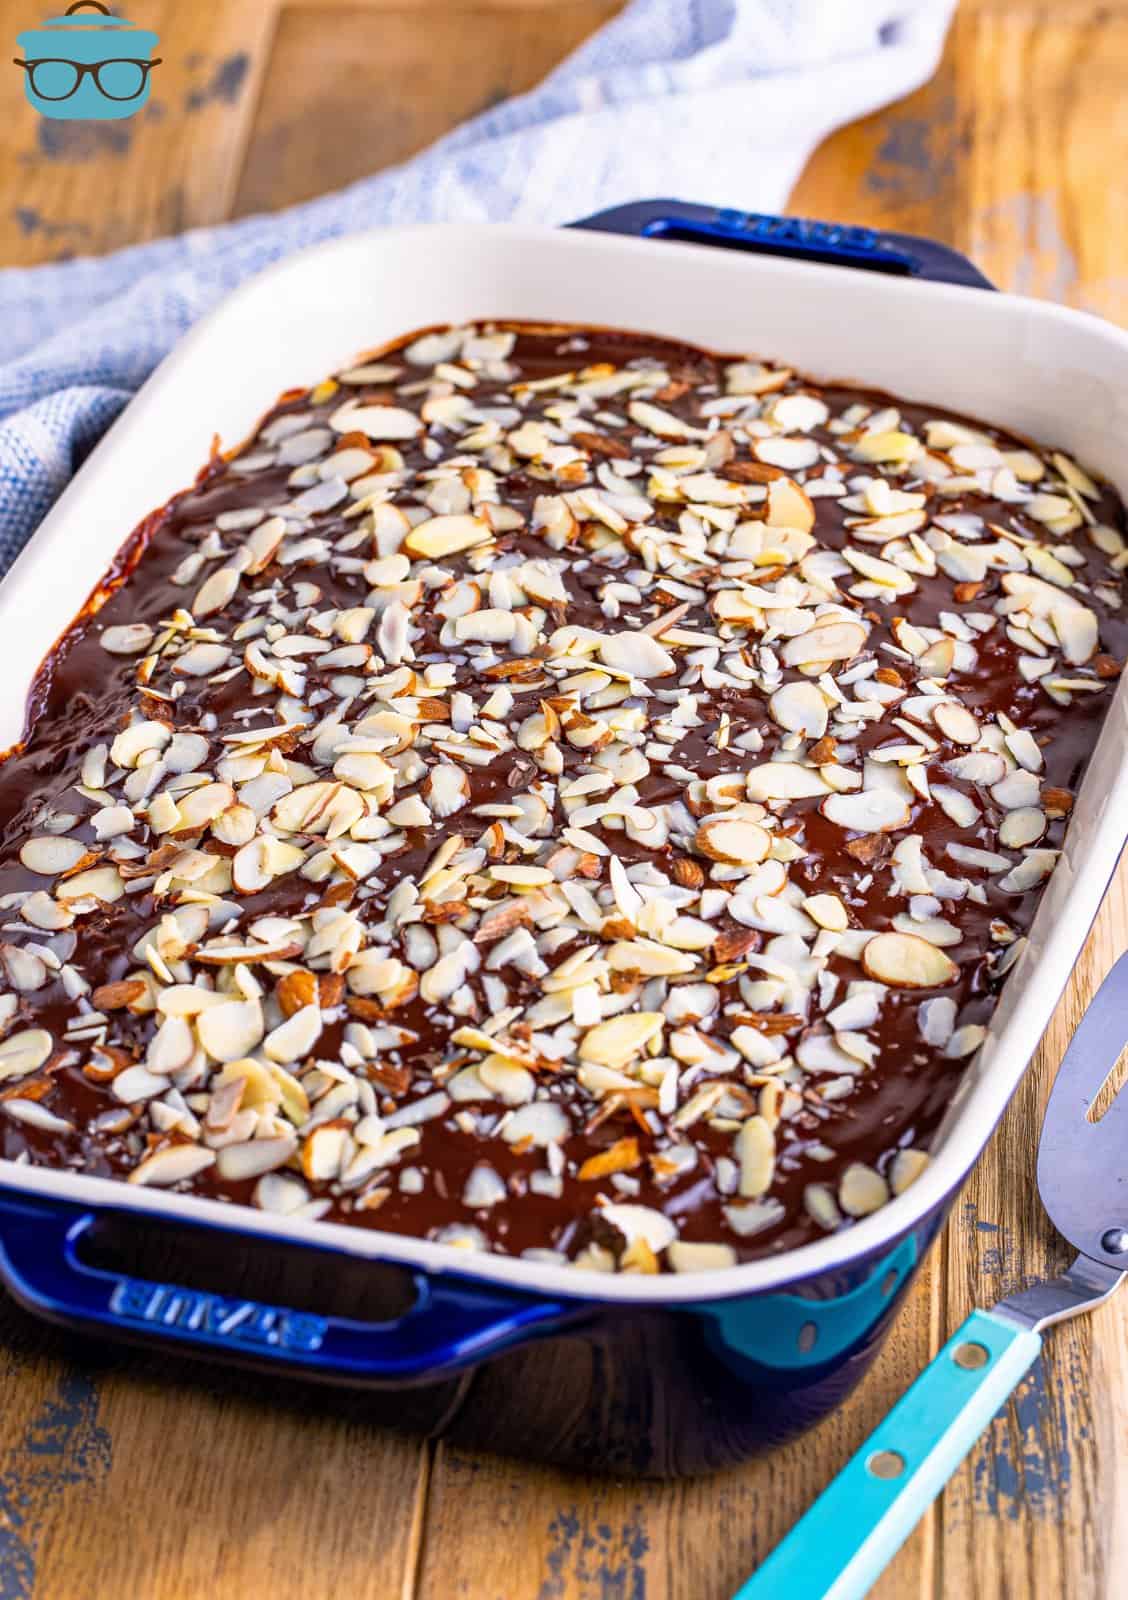 sliced almonds shown evenly sprinkled on top of chocolate cake in baking dish. 